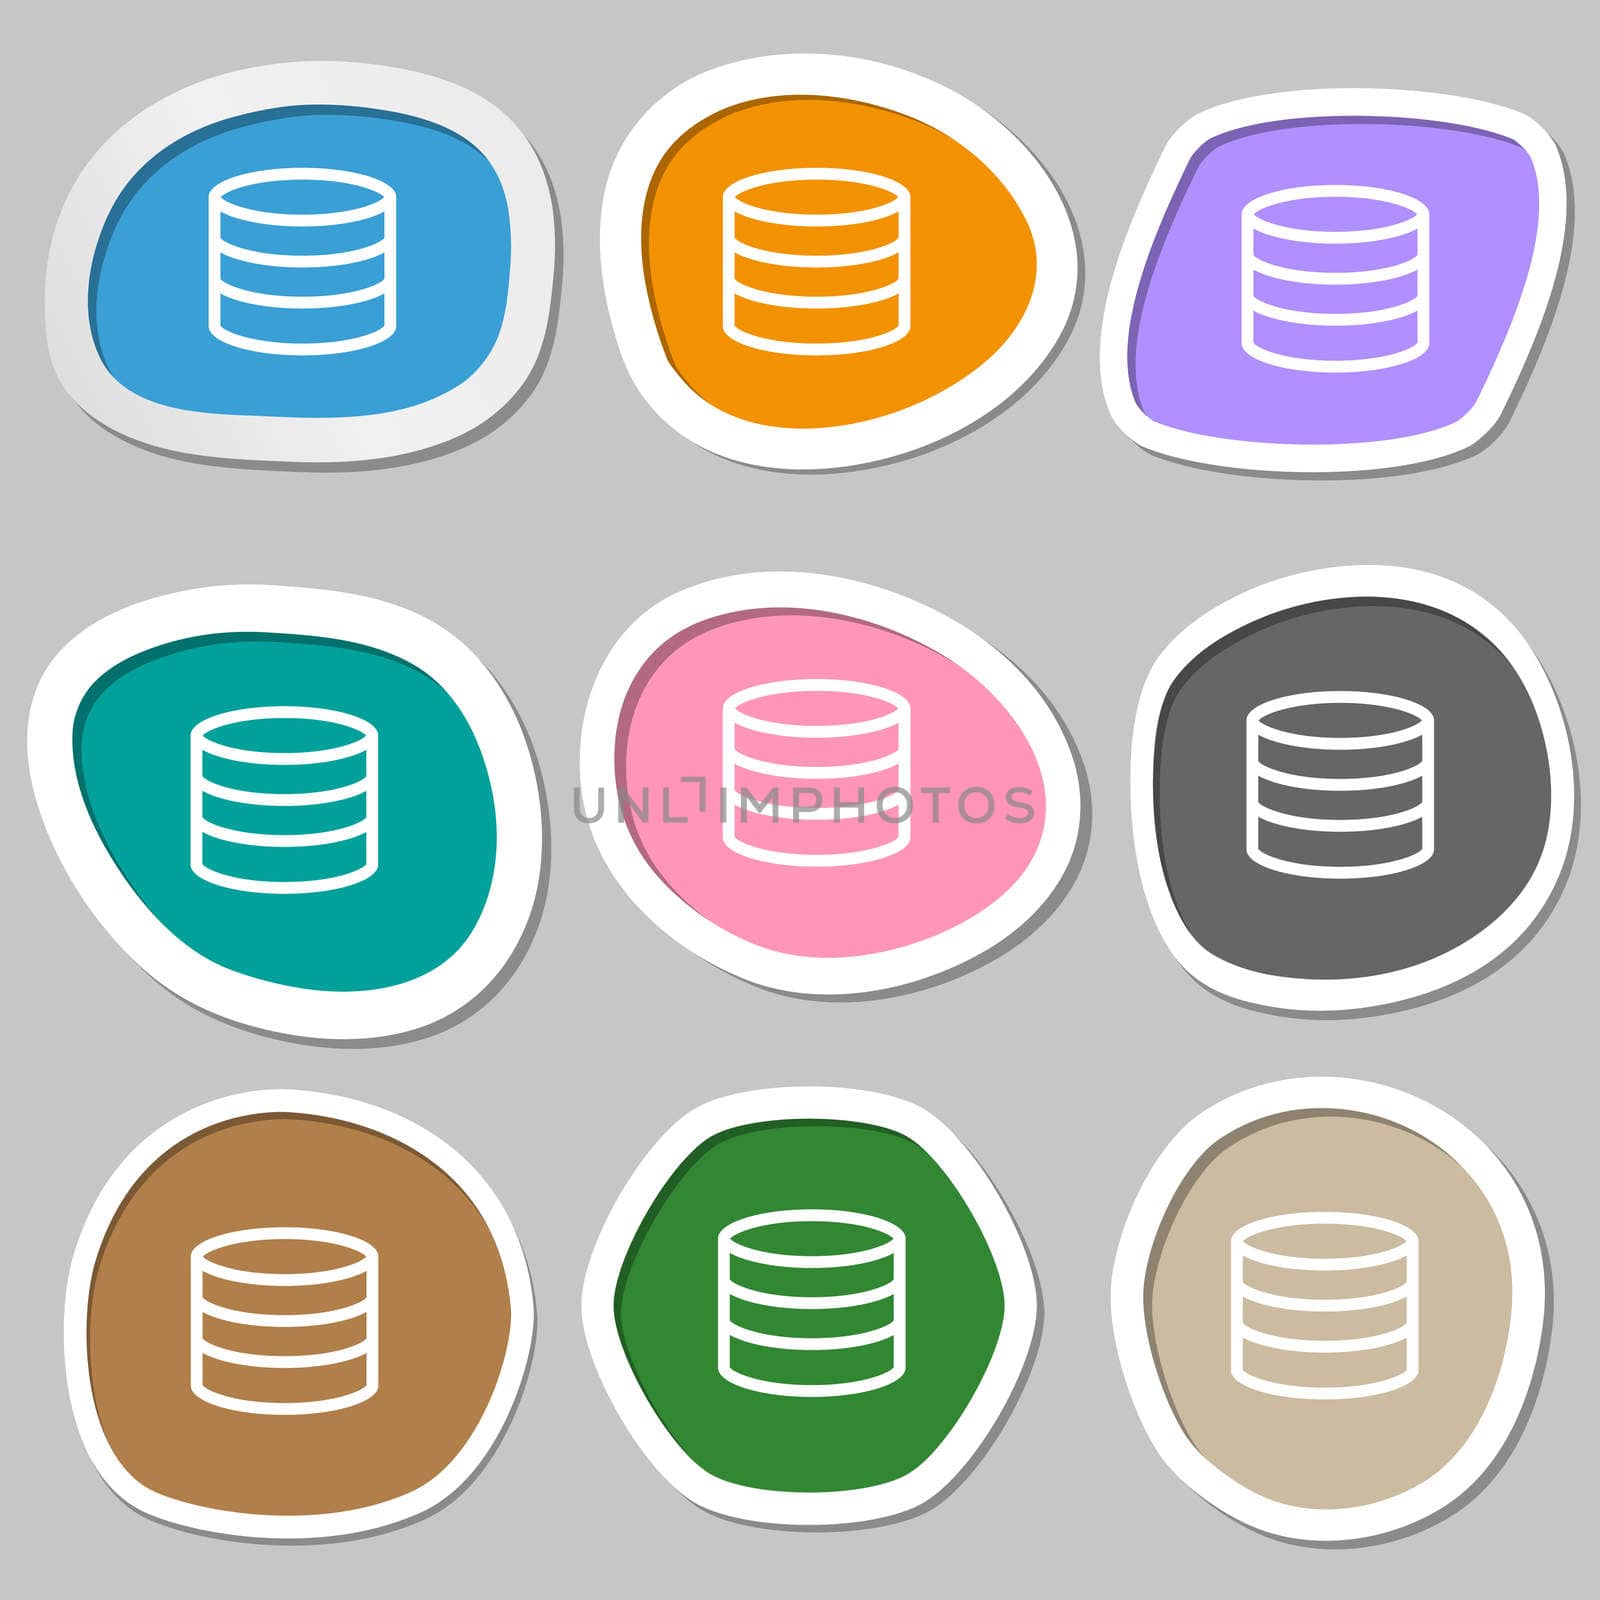 Hard disk and database icon symbols. Multicolored paper stickers. illustration